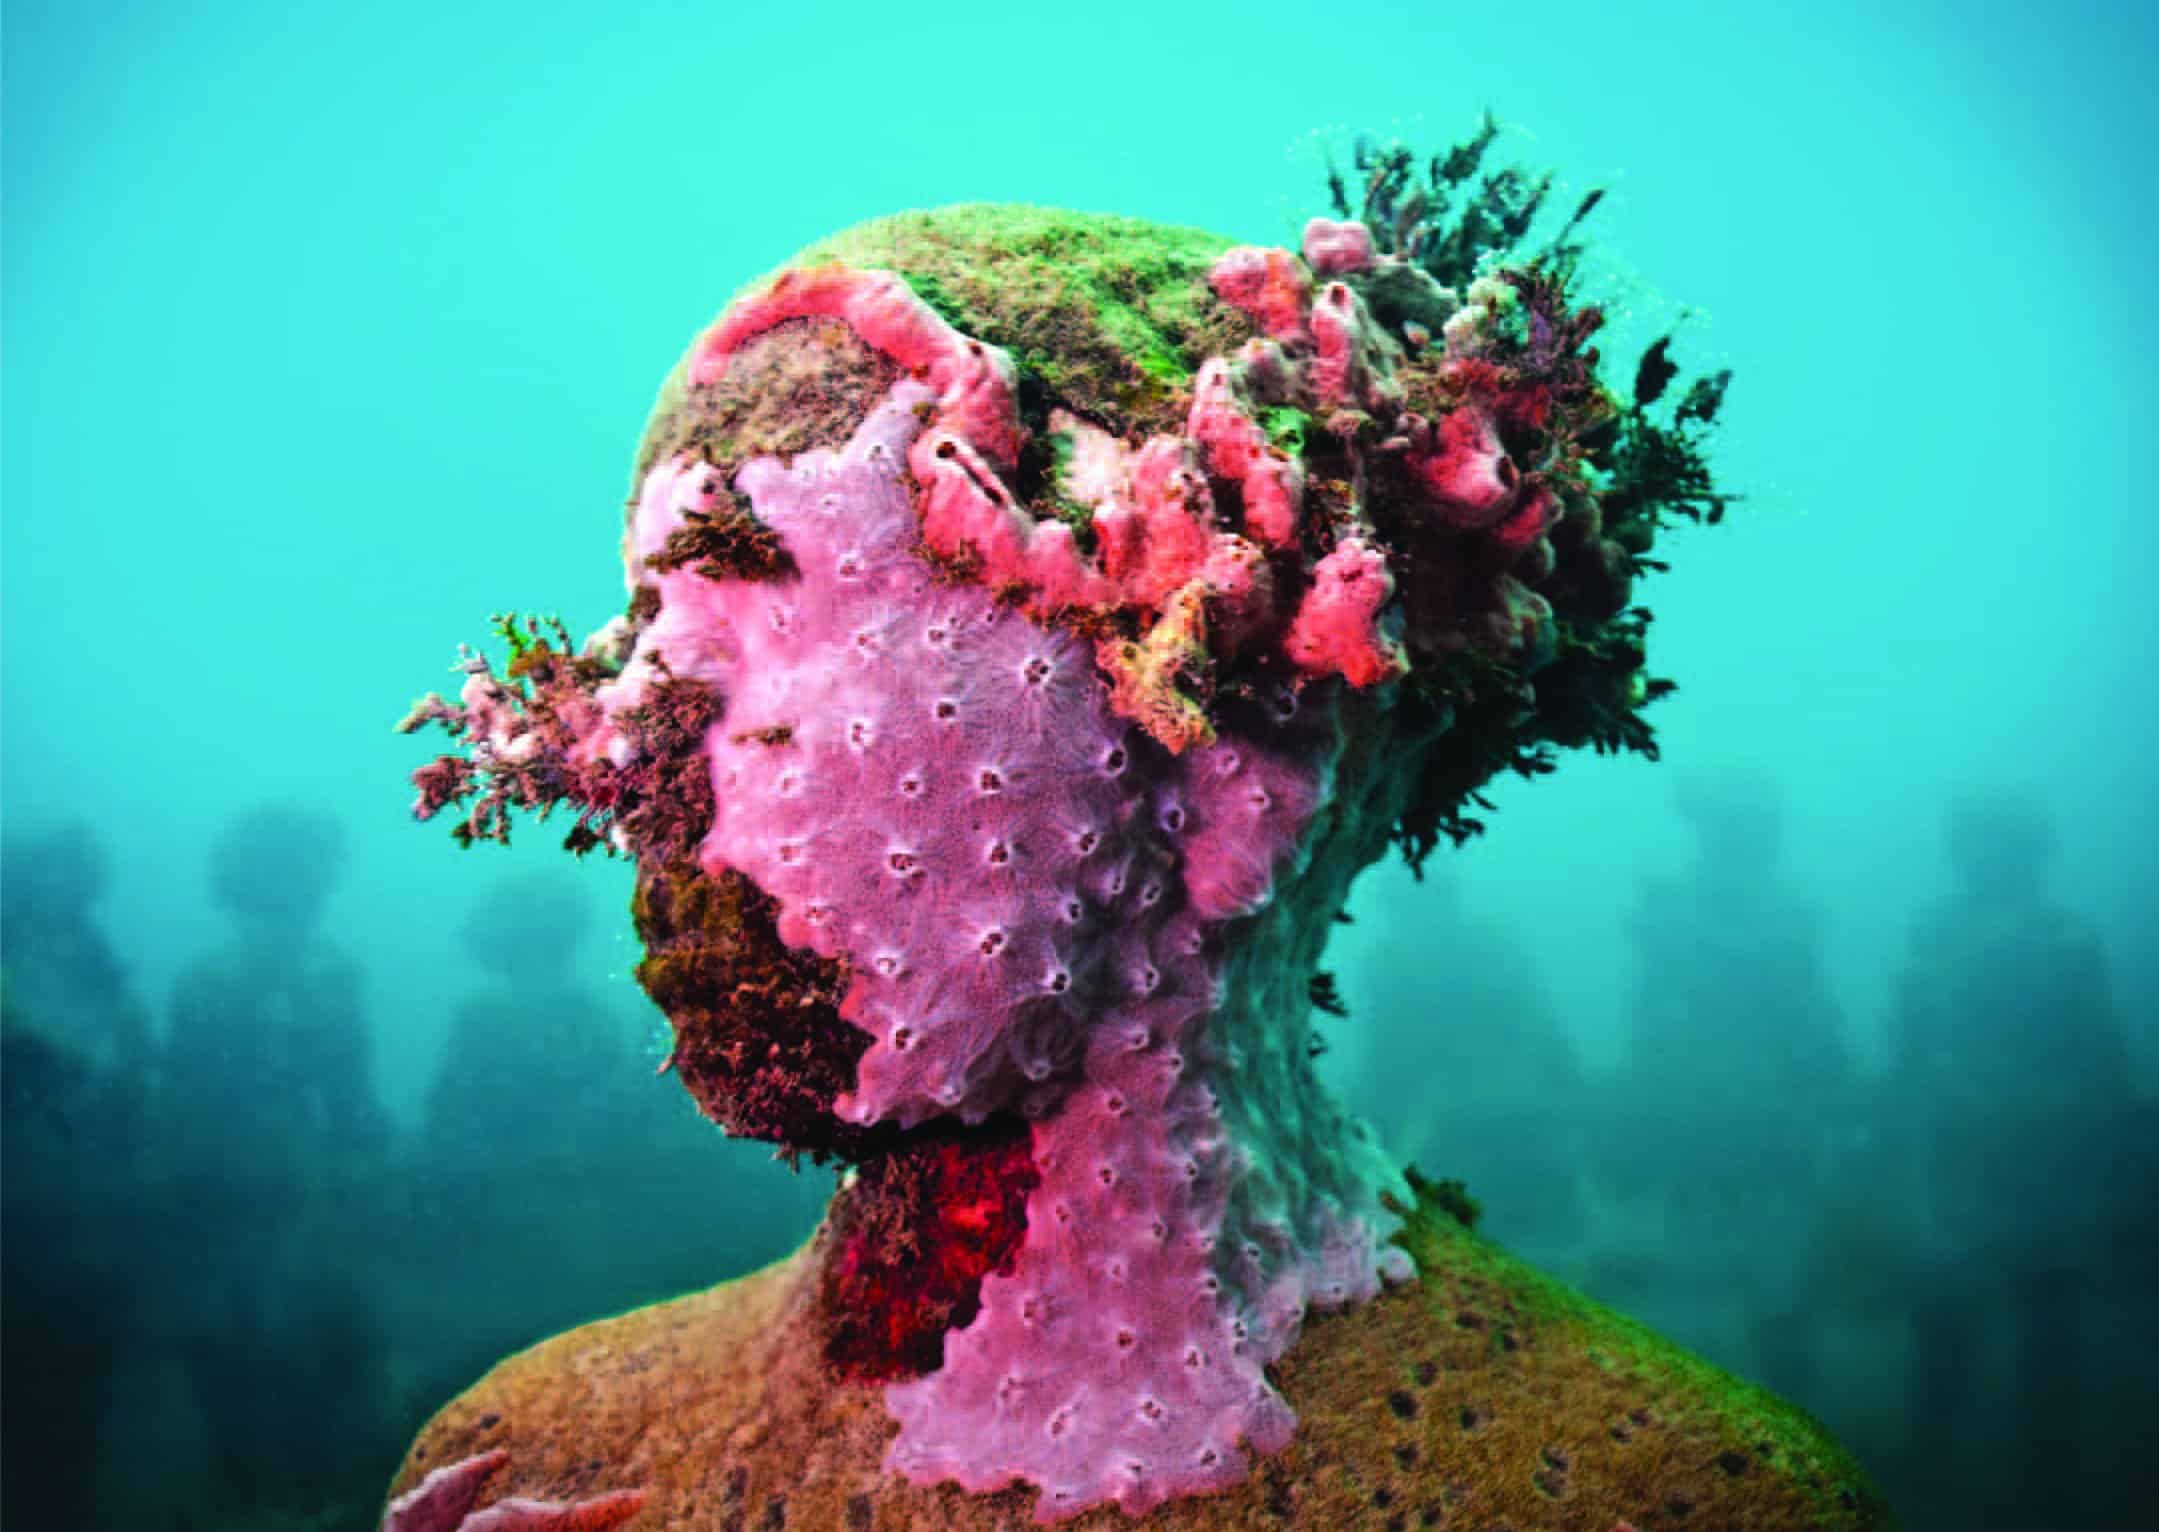 Artwork by Jason deCaires Taylor, Mexico